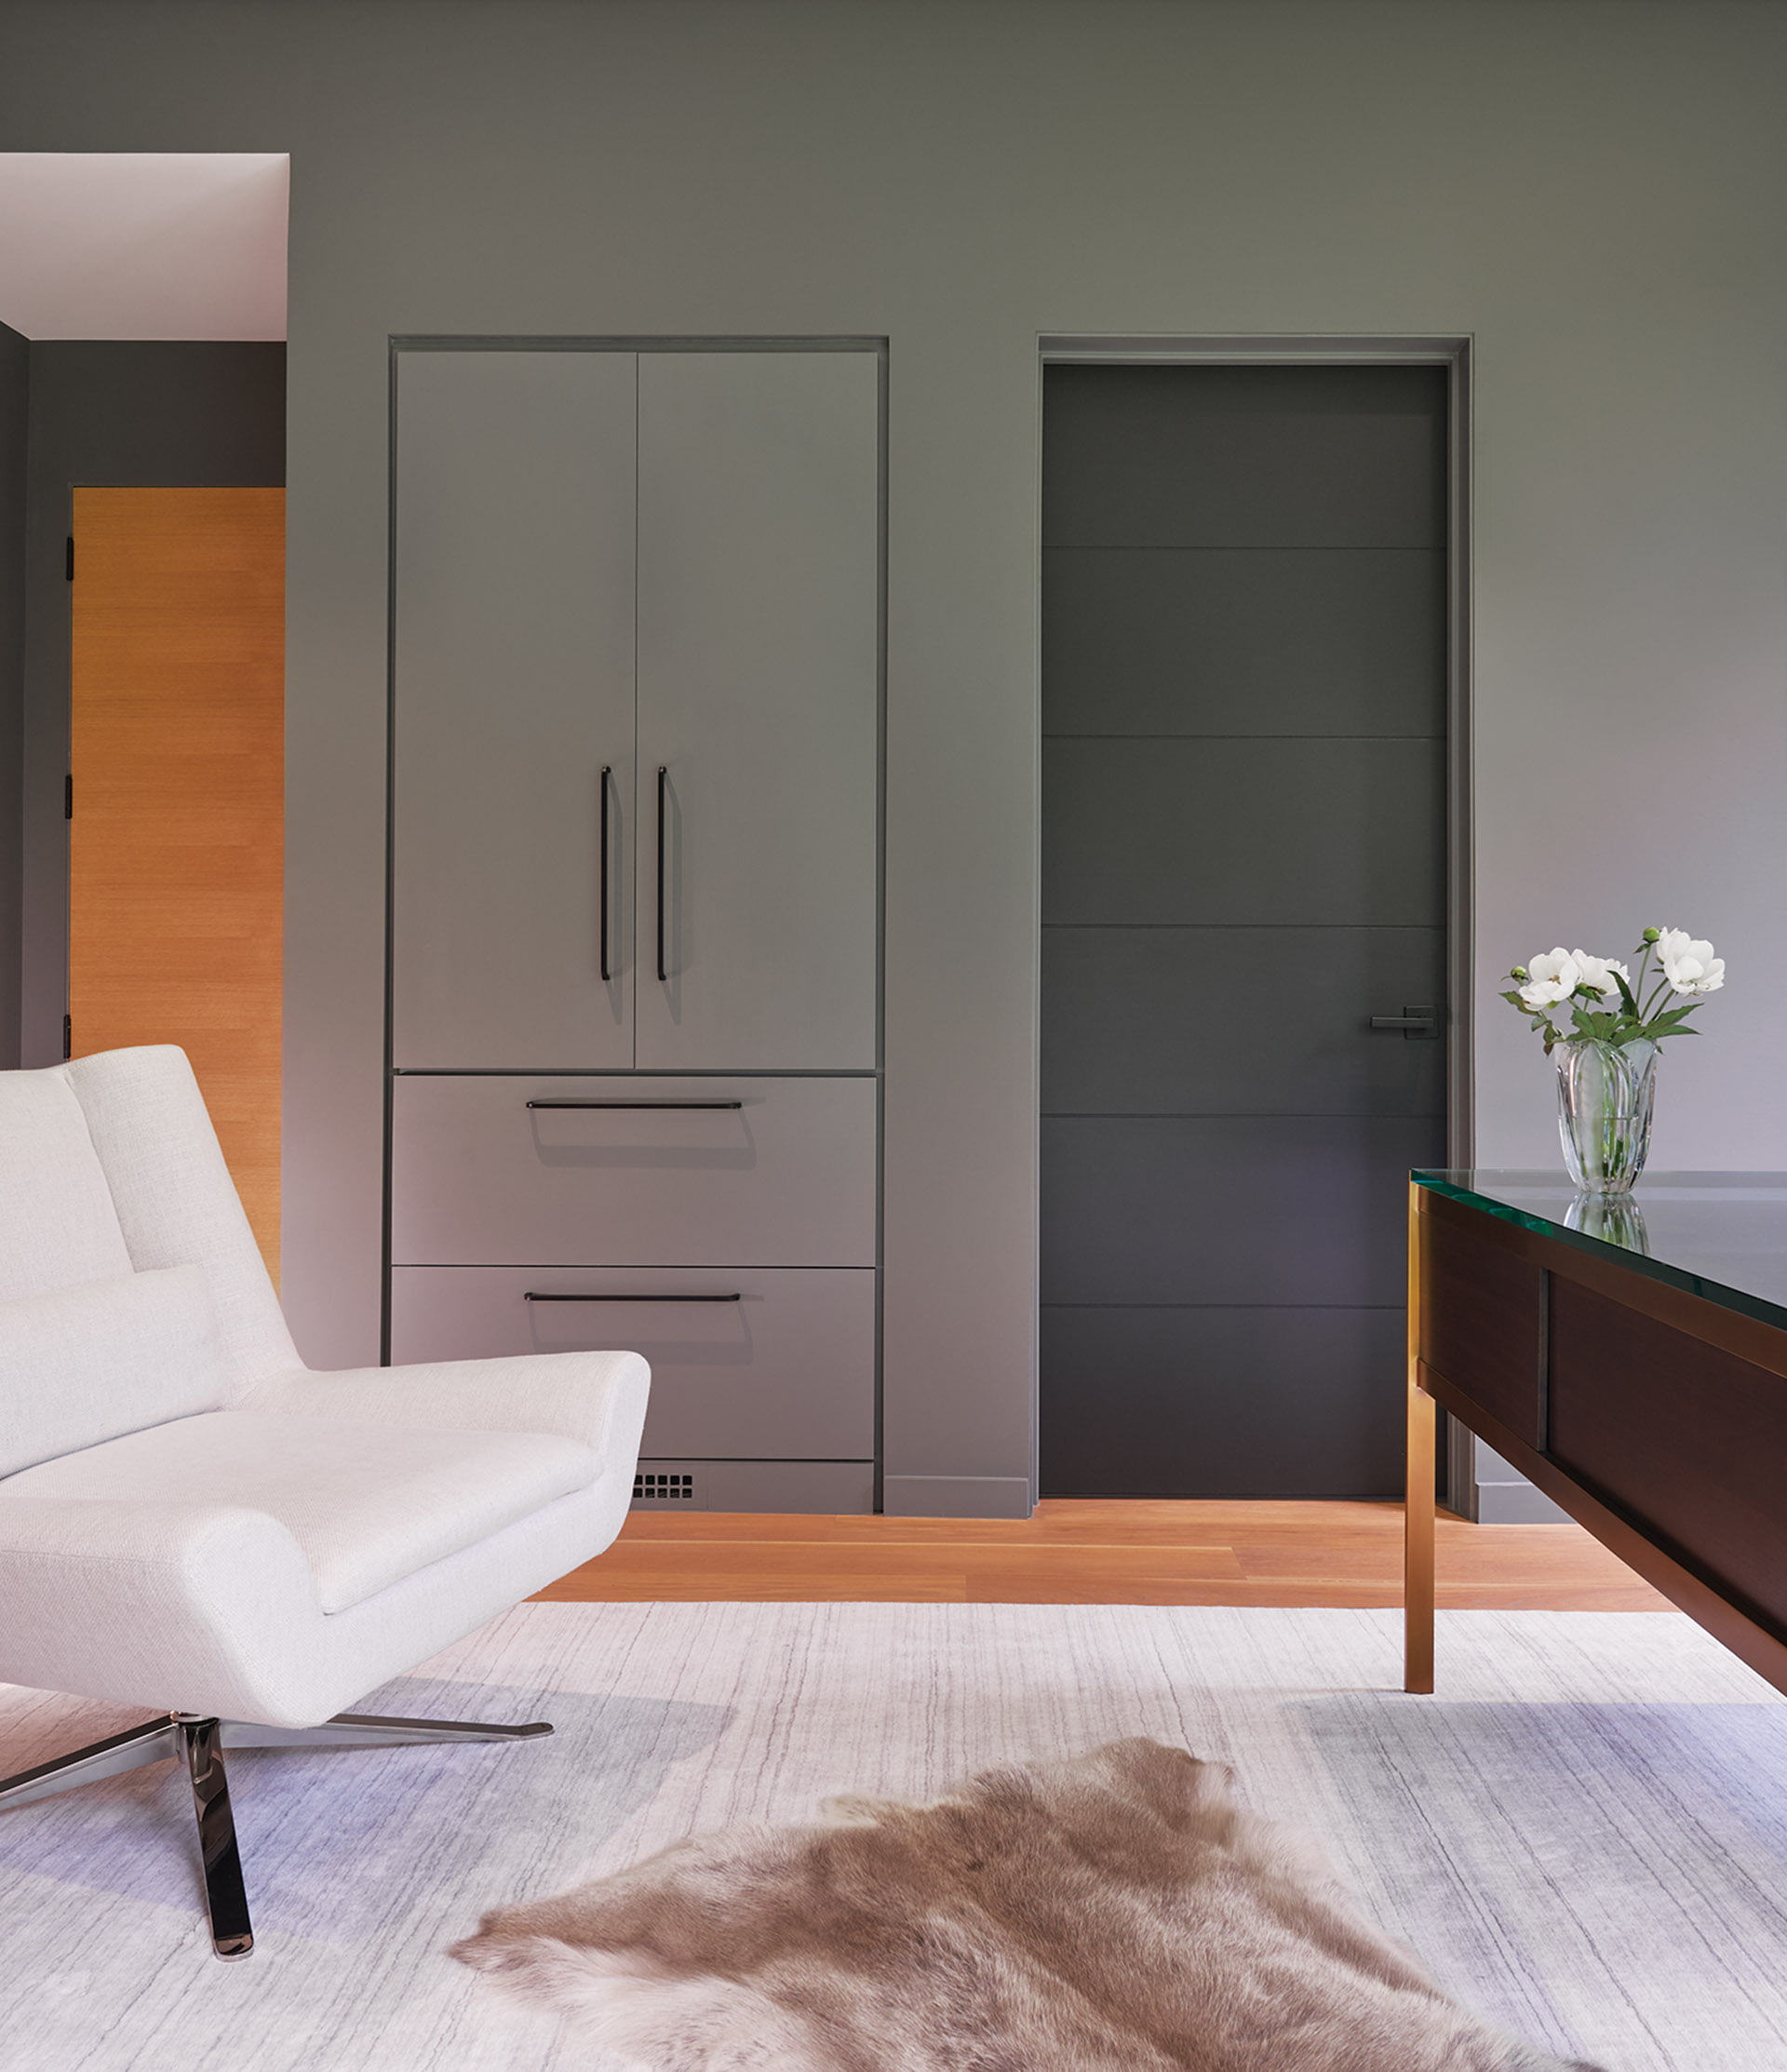 Office with built-in storage cabinets and drawers blend seamlessly into the moody, gray-painted walls.